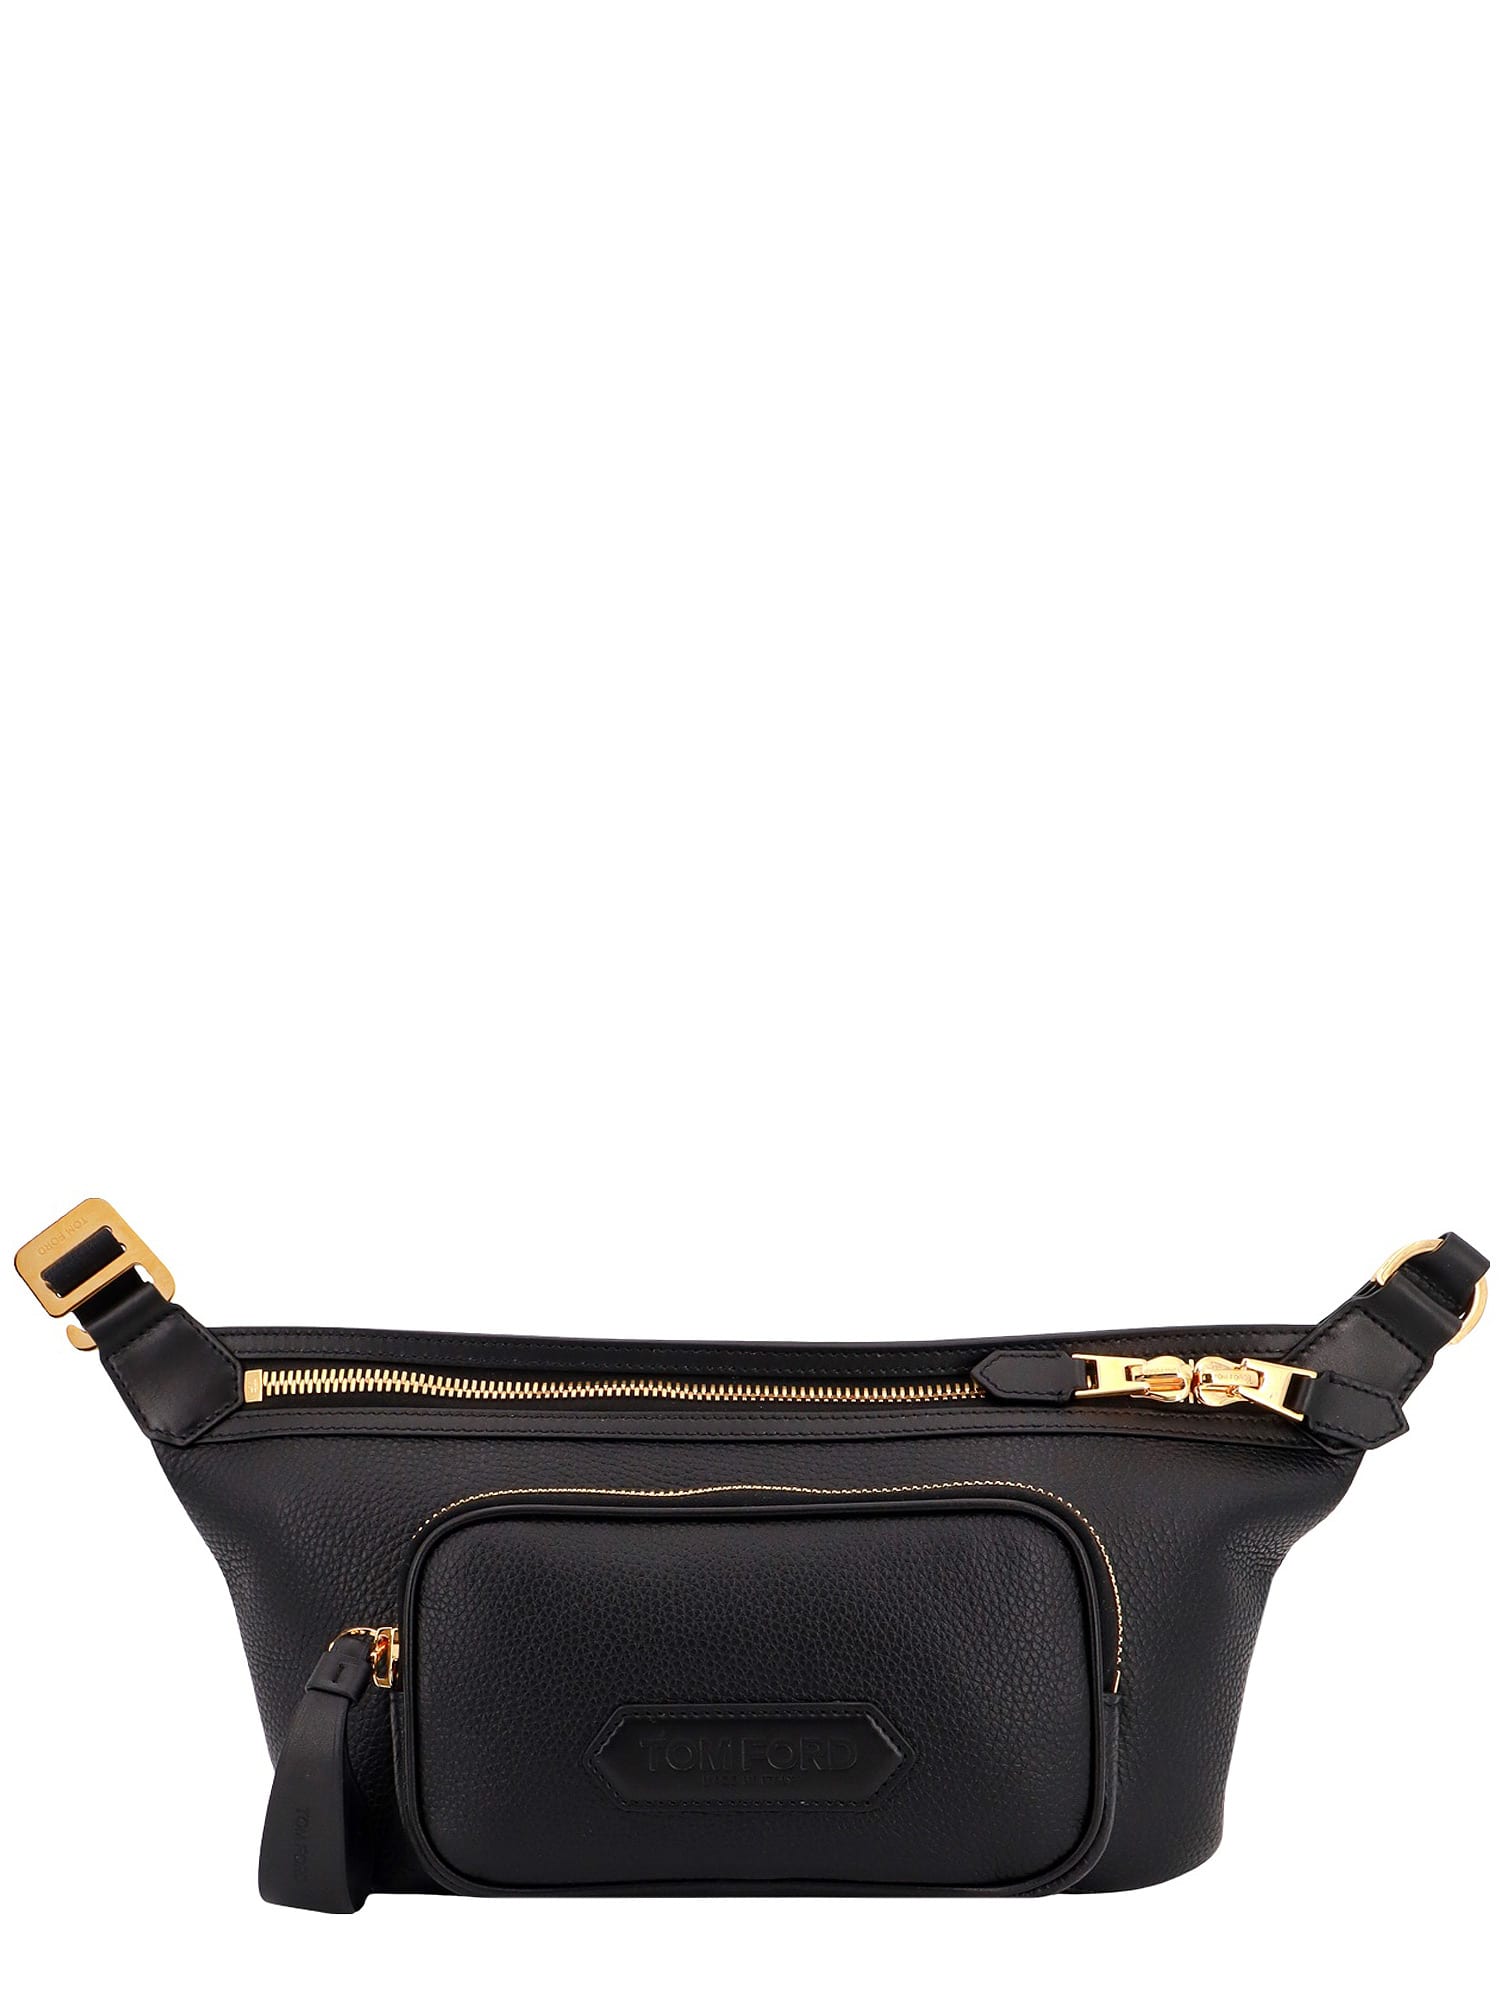 TOM FORD POUCH BAG